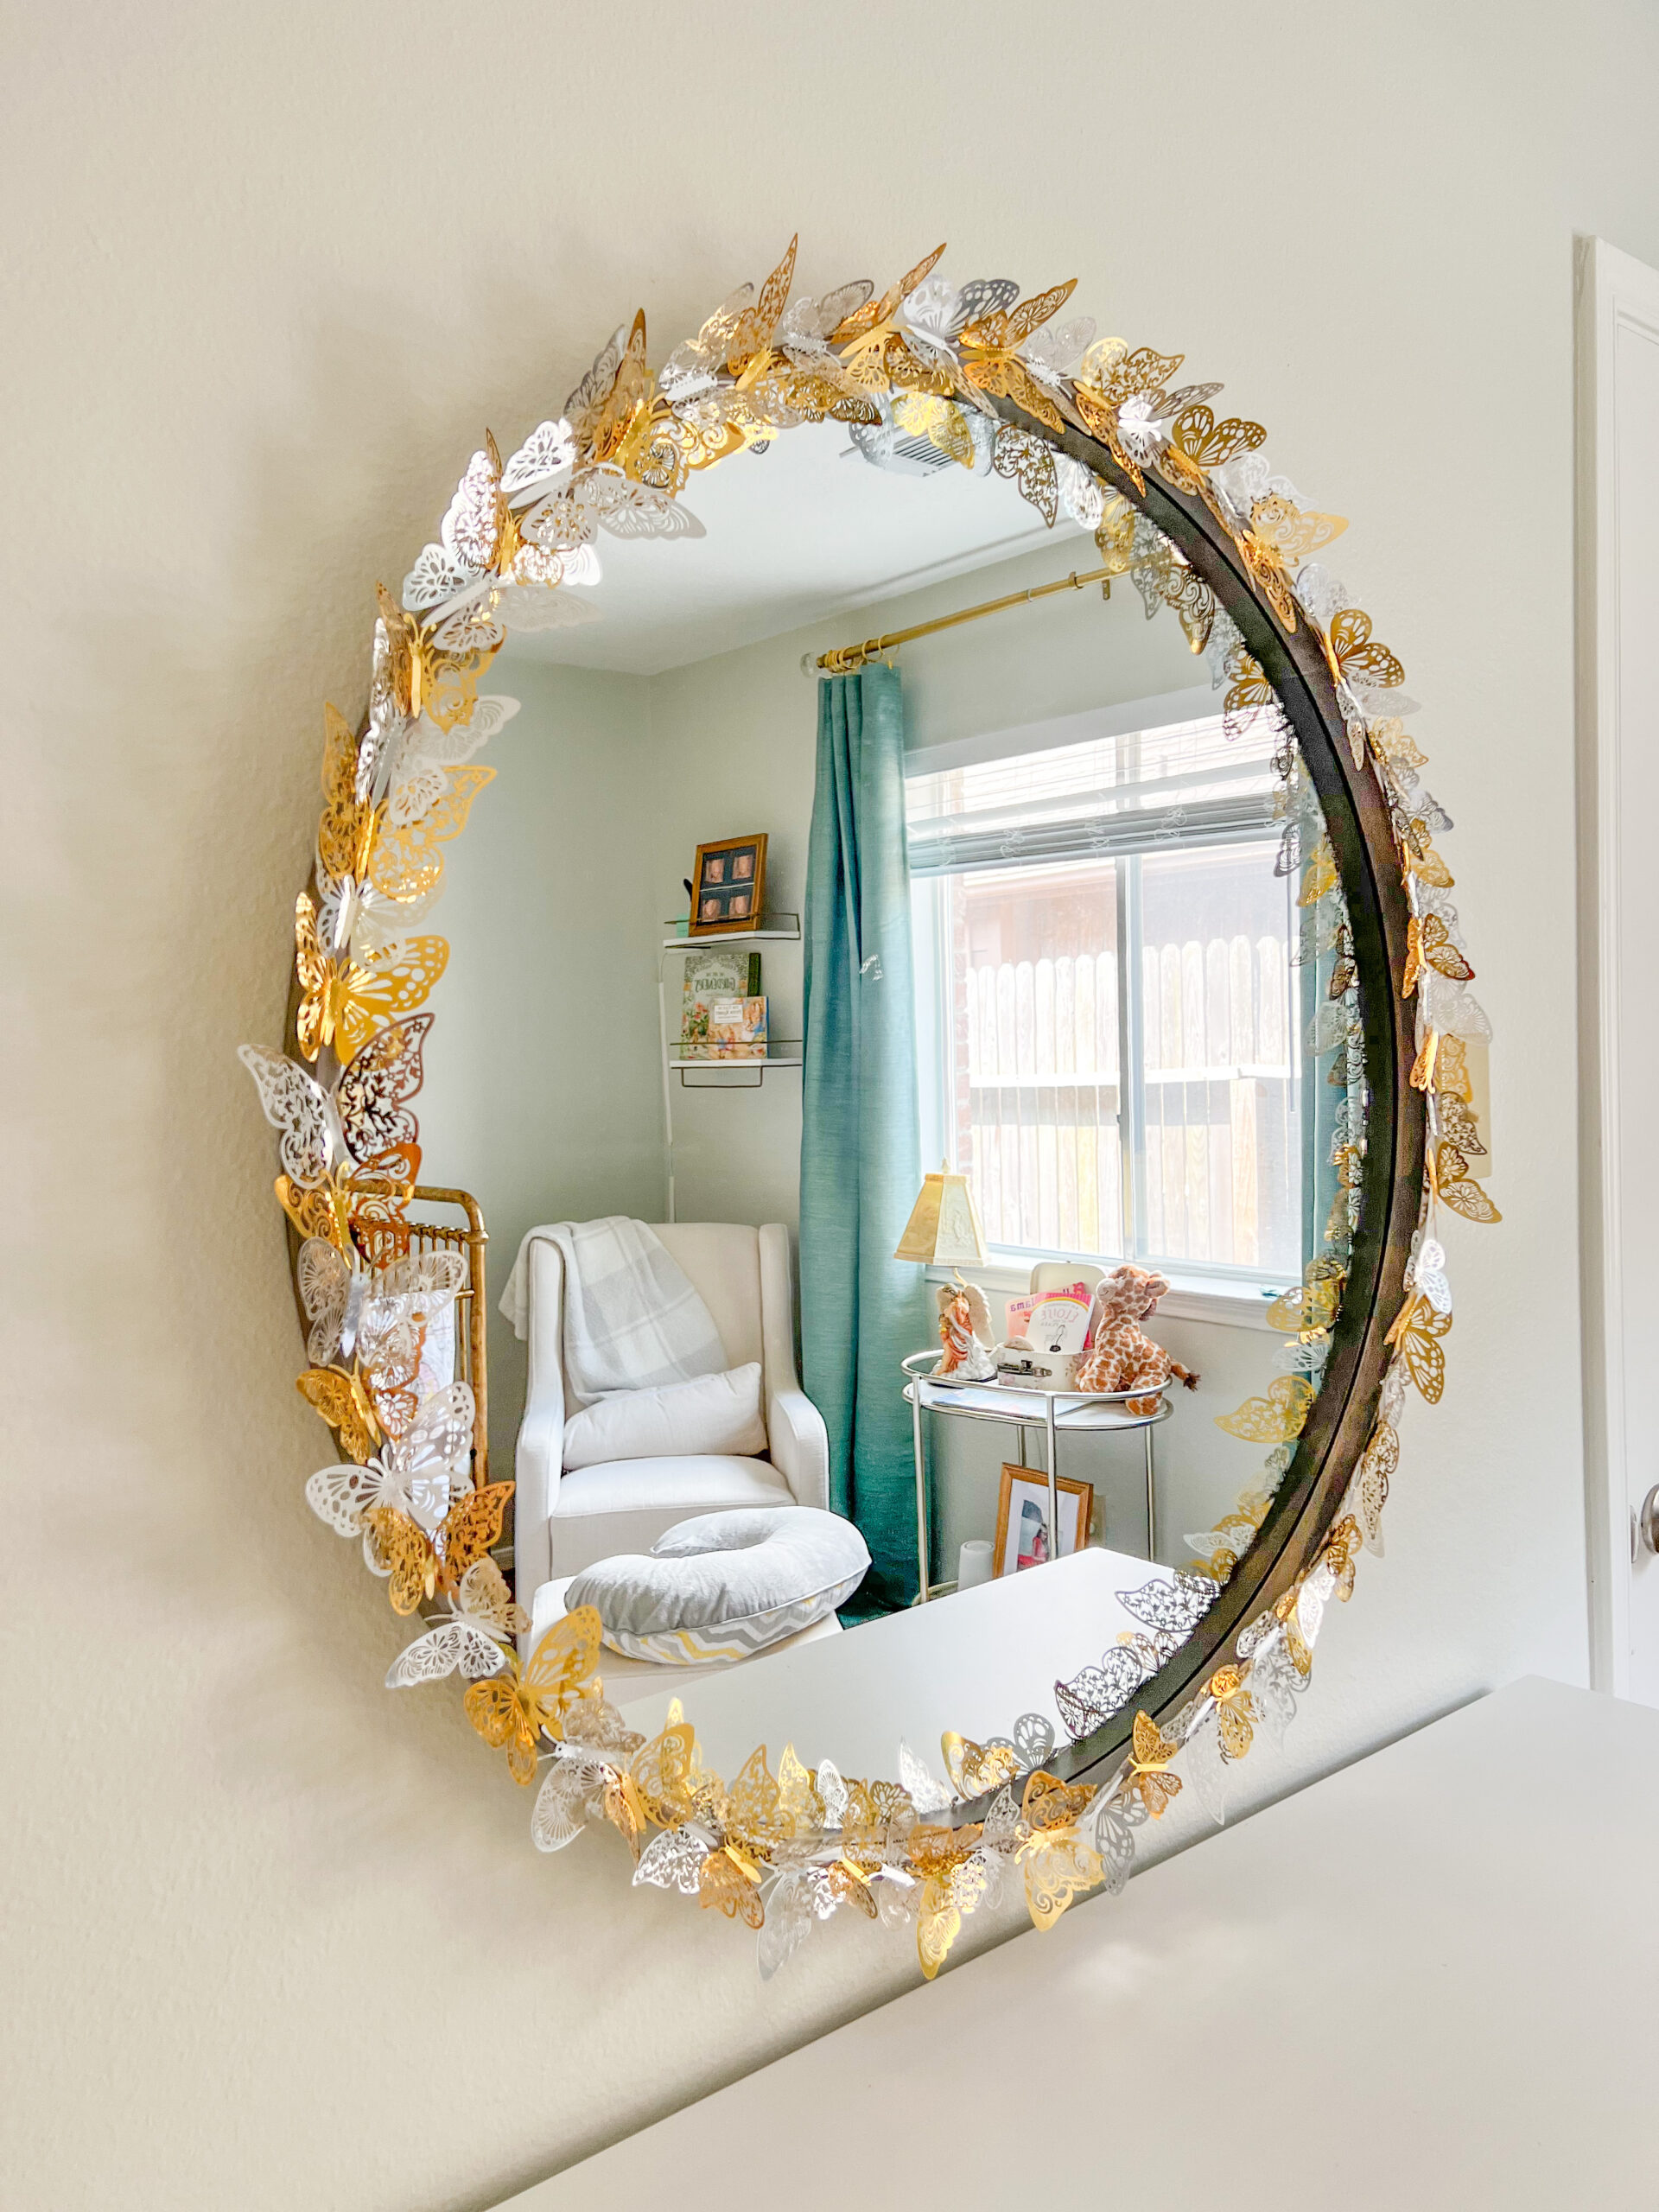  DIY Nursery Changing Table Makeover, gold butterfly mirror